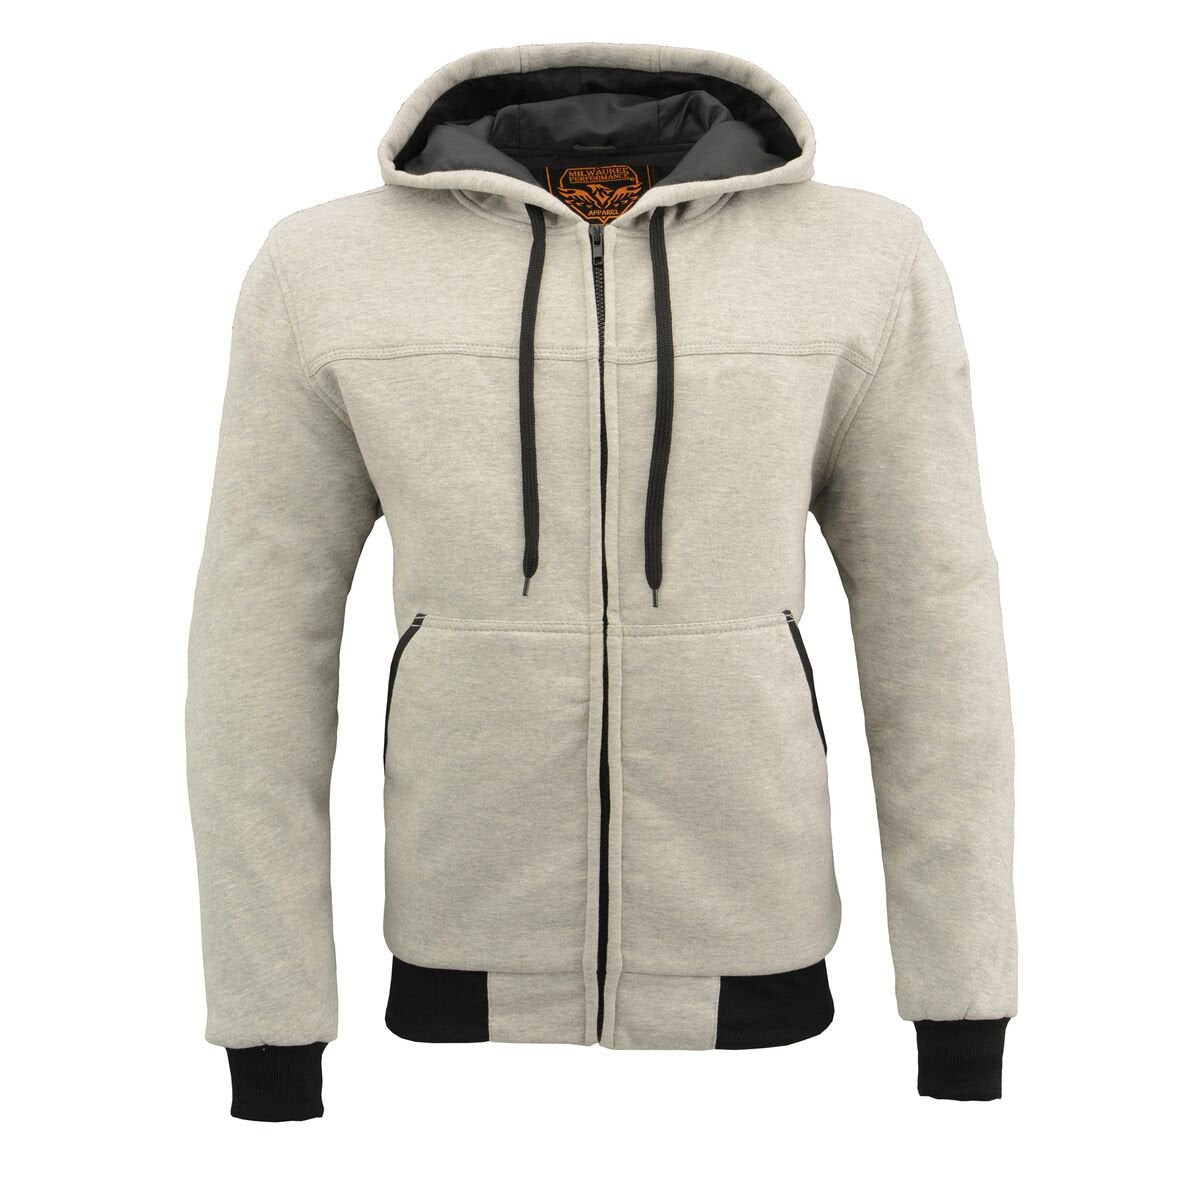 Milwaukee Leather MPM1788 Men's Silver CE Approved Armored Riding Hoodie Sweater with Aramid by DuPont Fibers